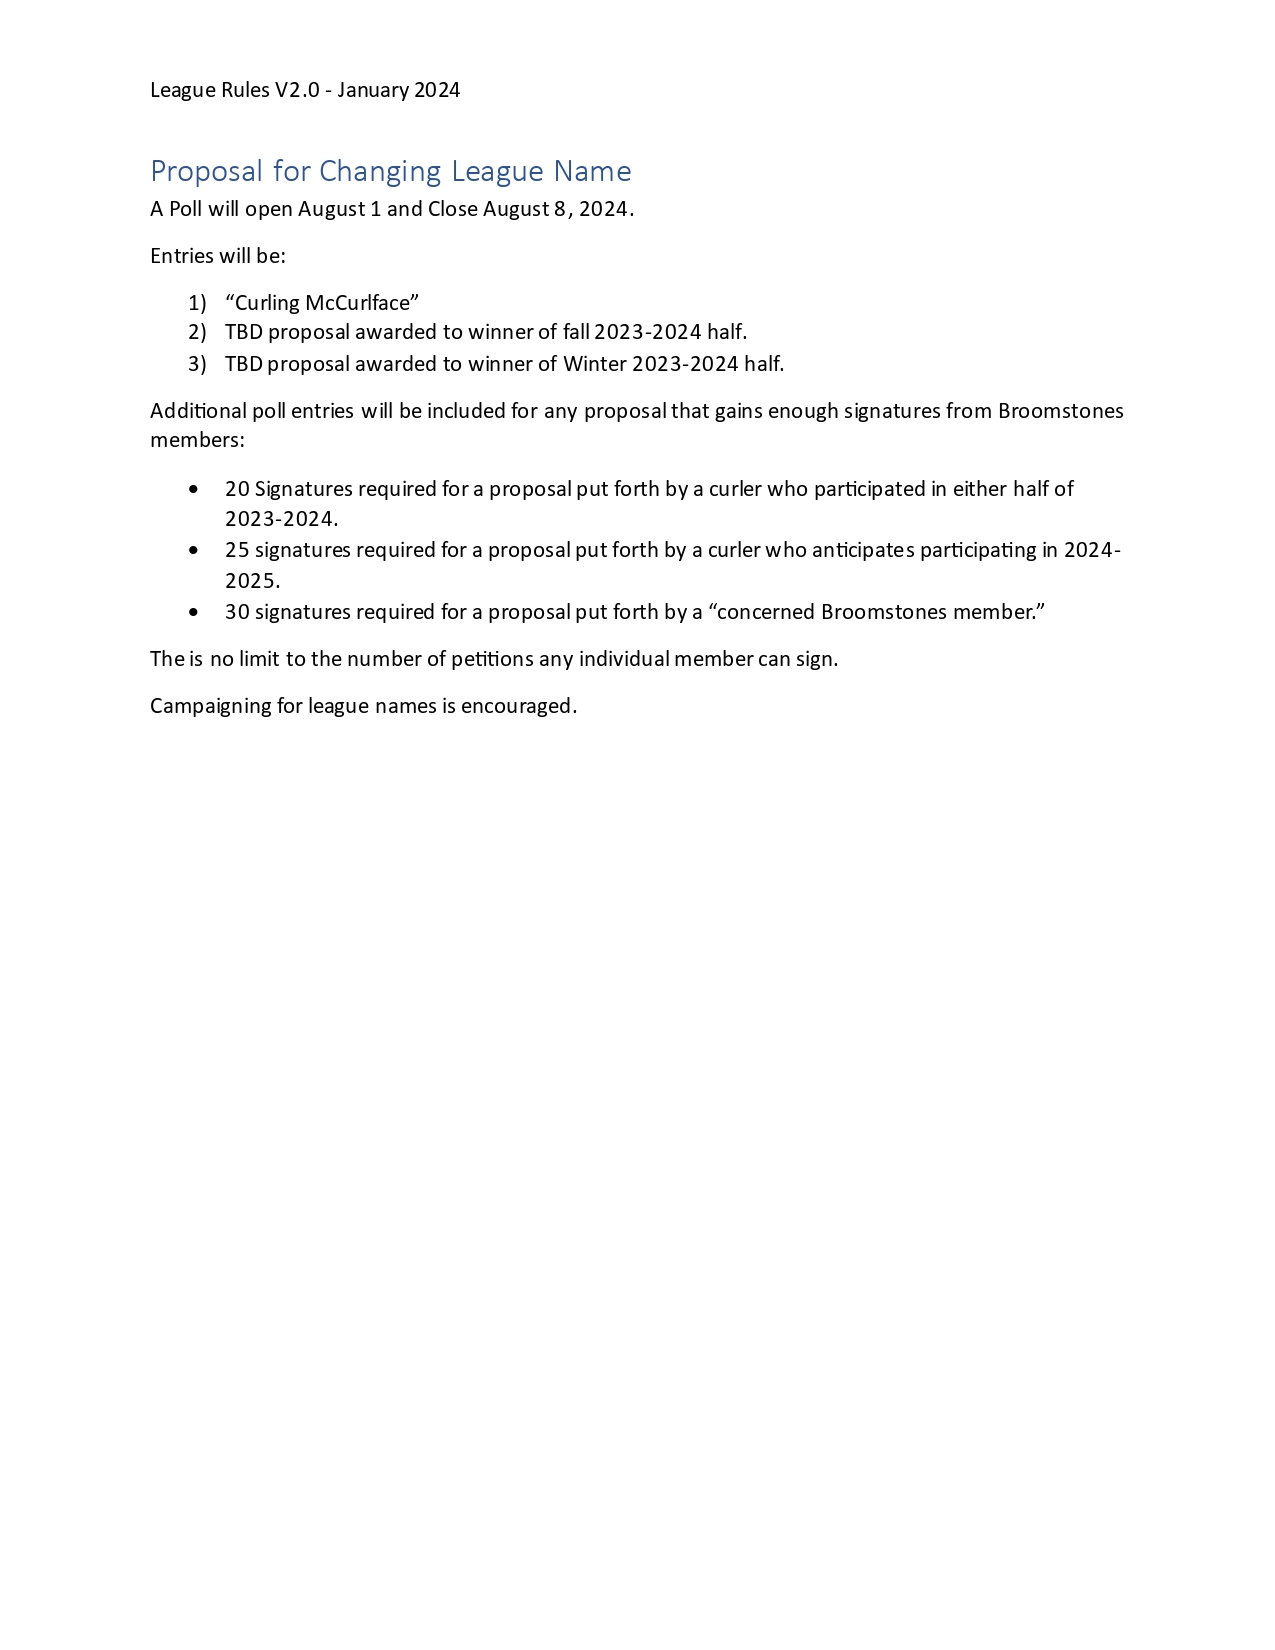 CMCF 2023 24 2nd half rules page 0004